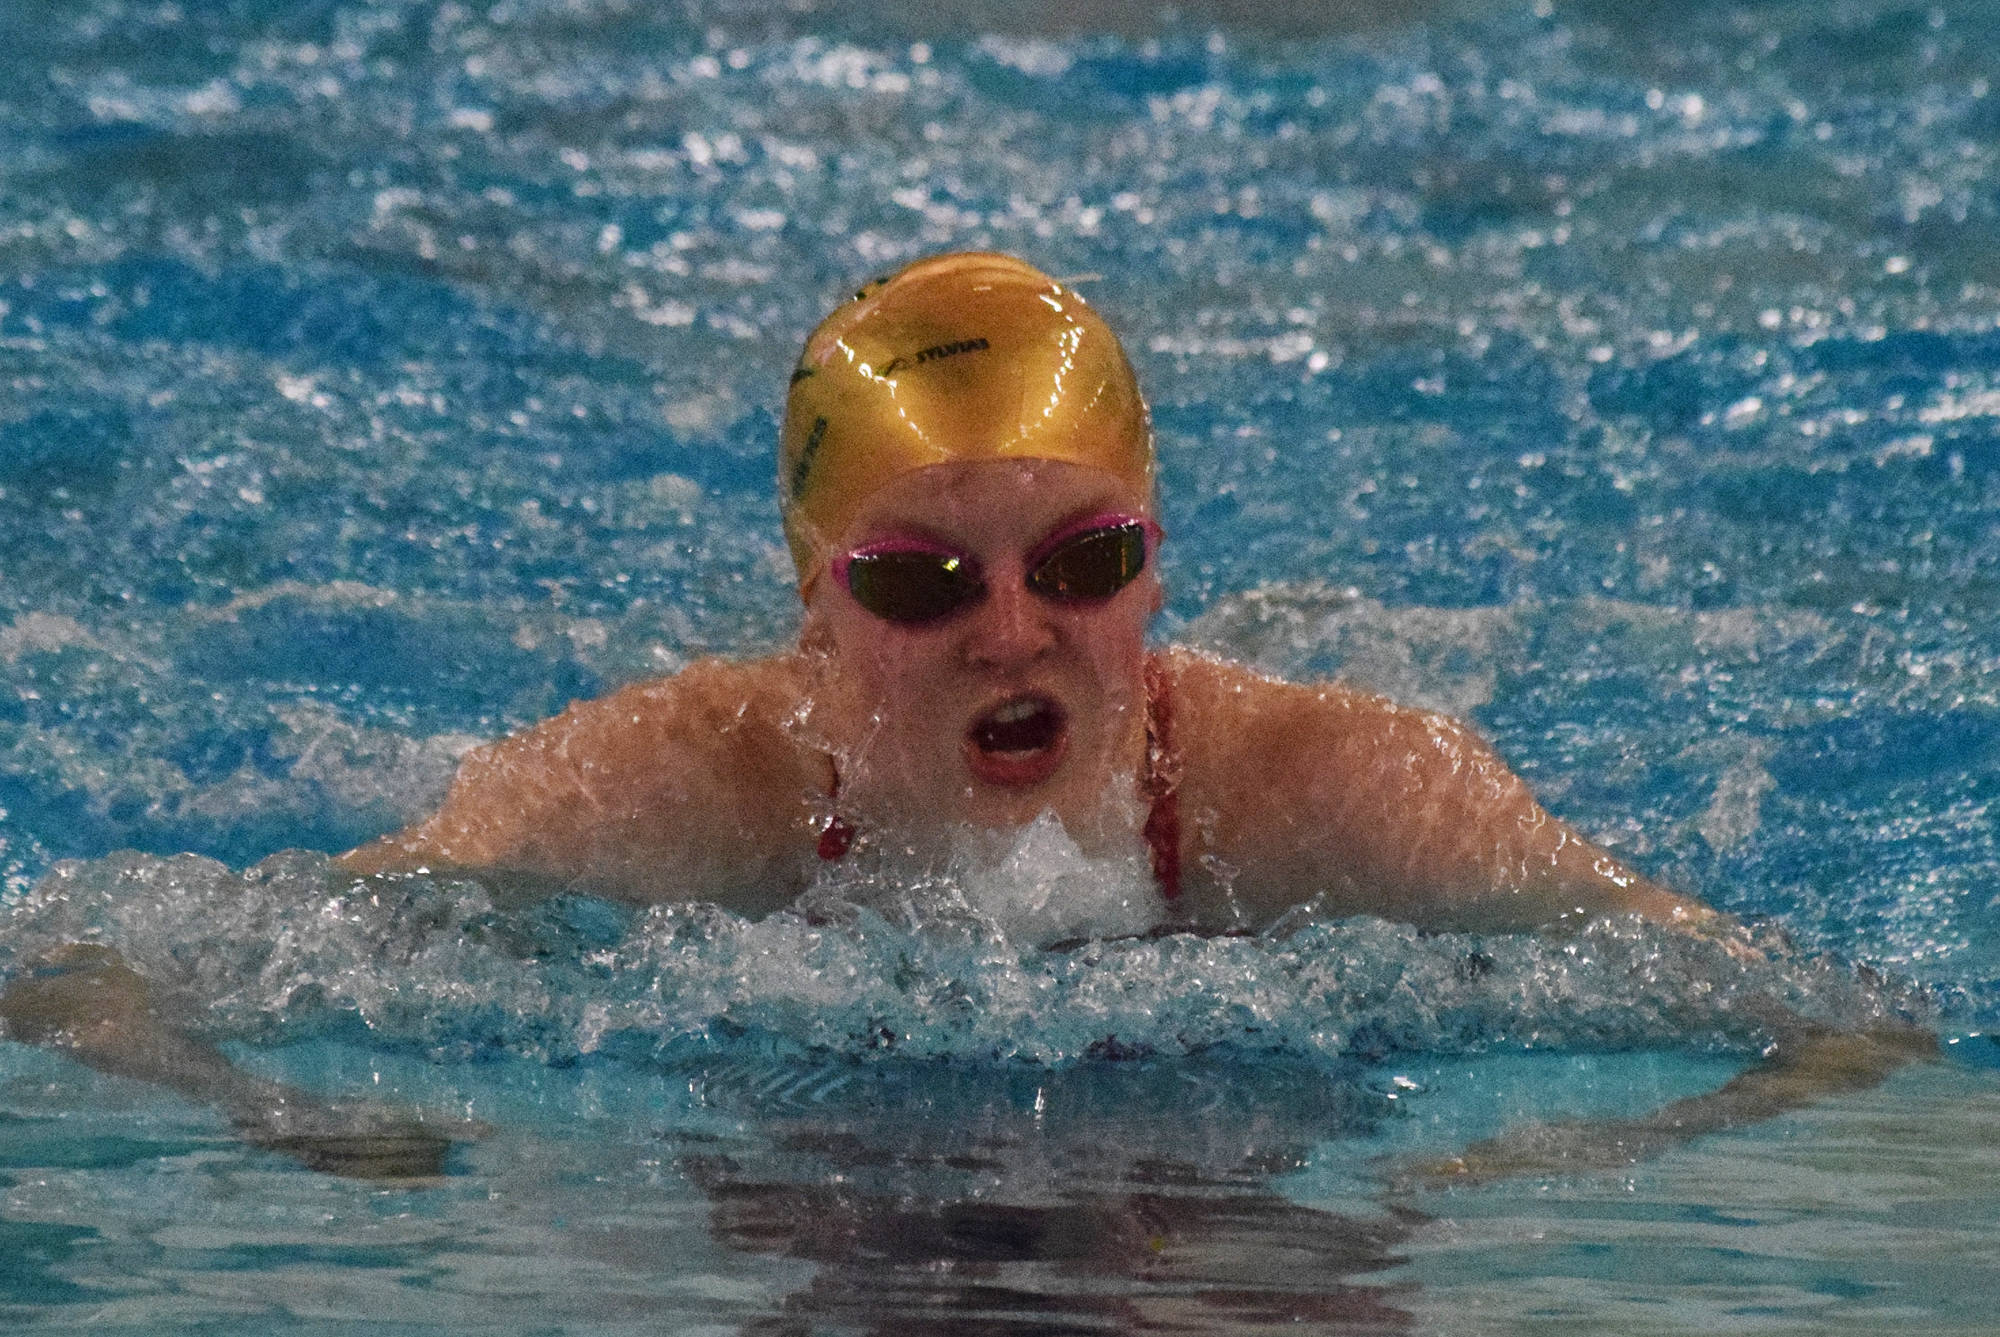 Seward’s Lydia Jacoby races to the win in the girls 100-yard breaststroke final Saturday, Nov. 9, 2019, at the ASAA state swimming and diving championship at the Bartlett pool in Anchorage, Alaska. (Photo by Joey Klecka/Peninsula Clarion)